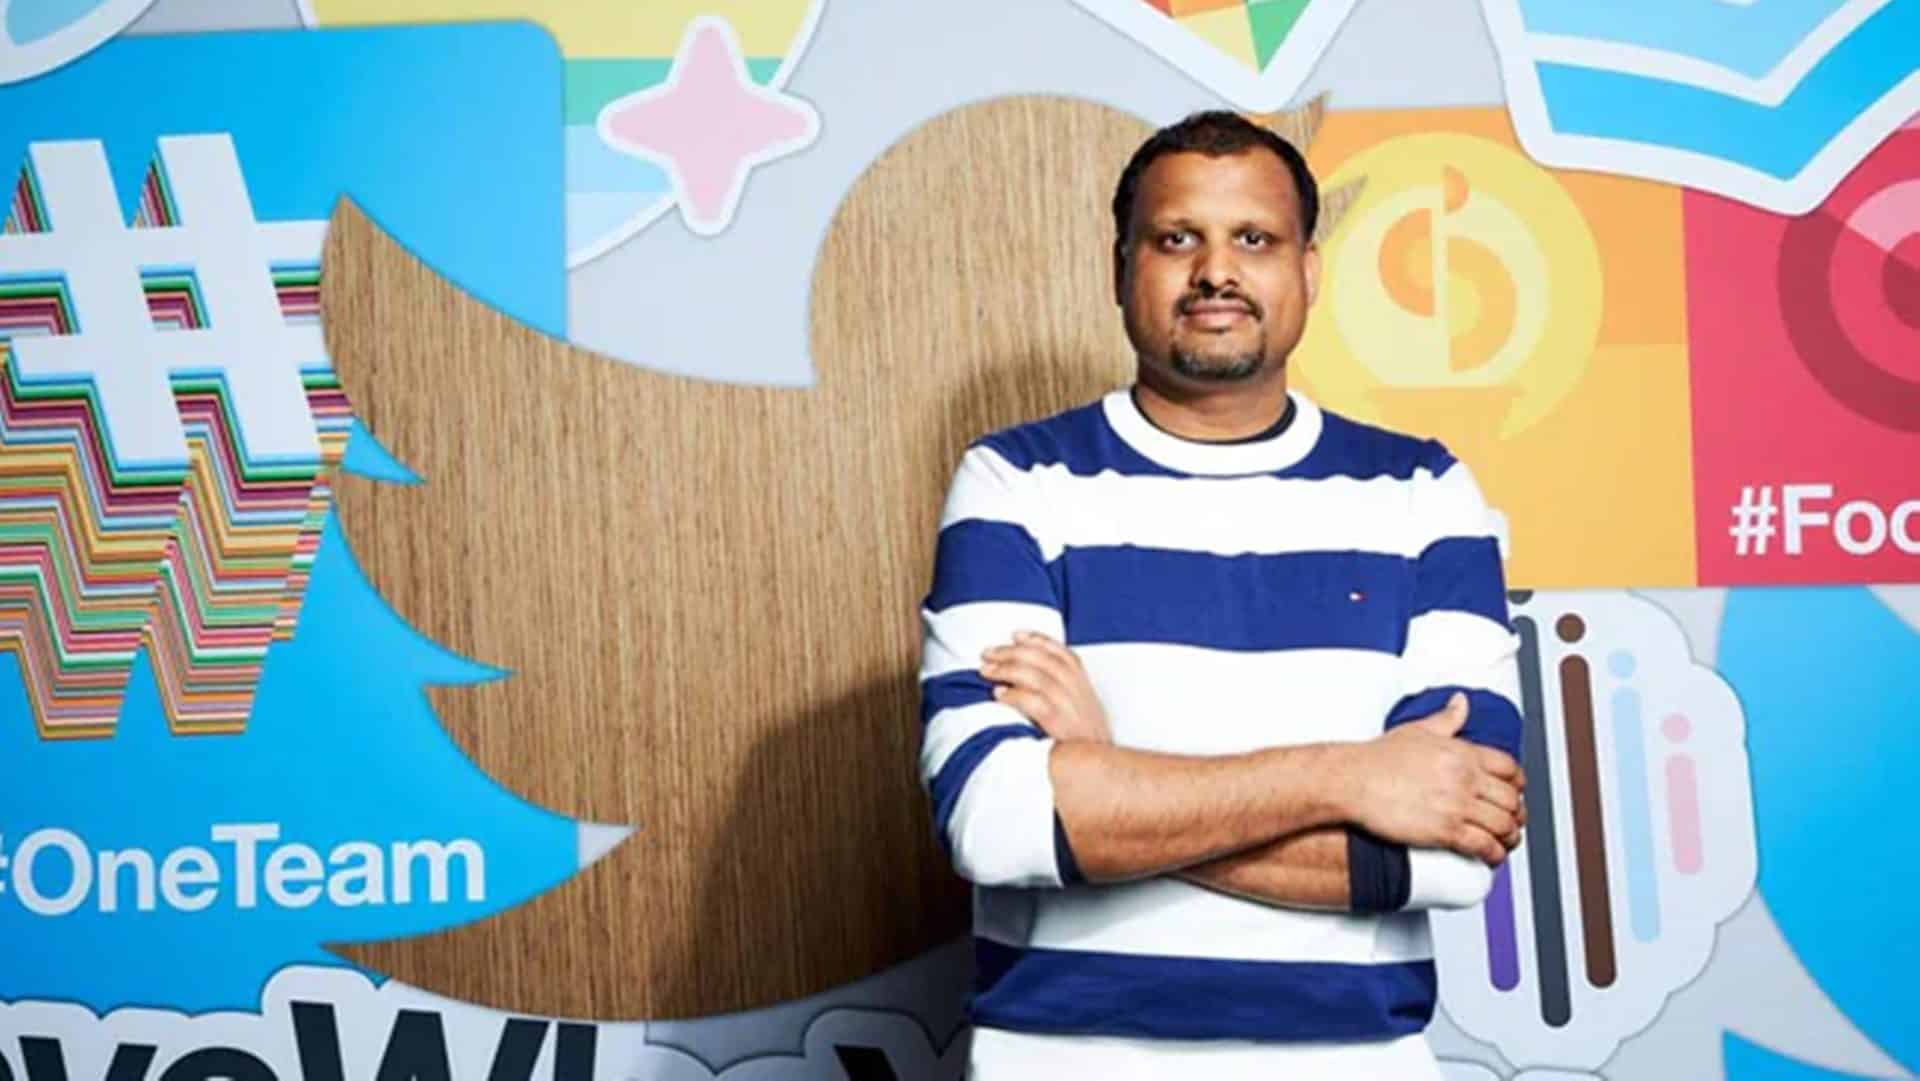 Loni Assault Case: No coercive actions against Twitter India MD, says Karnataka High Court